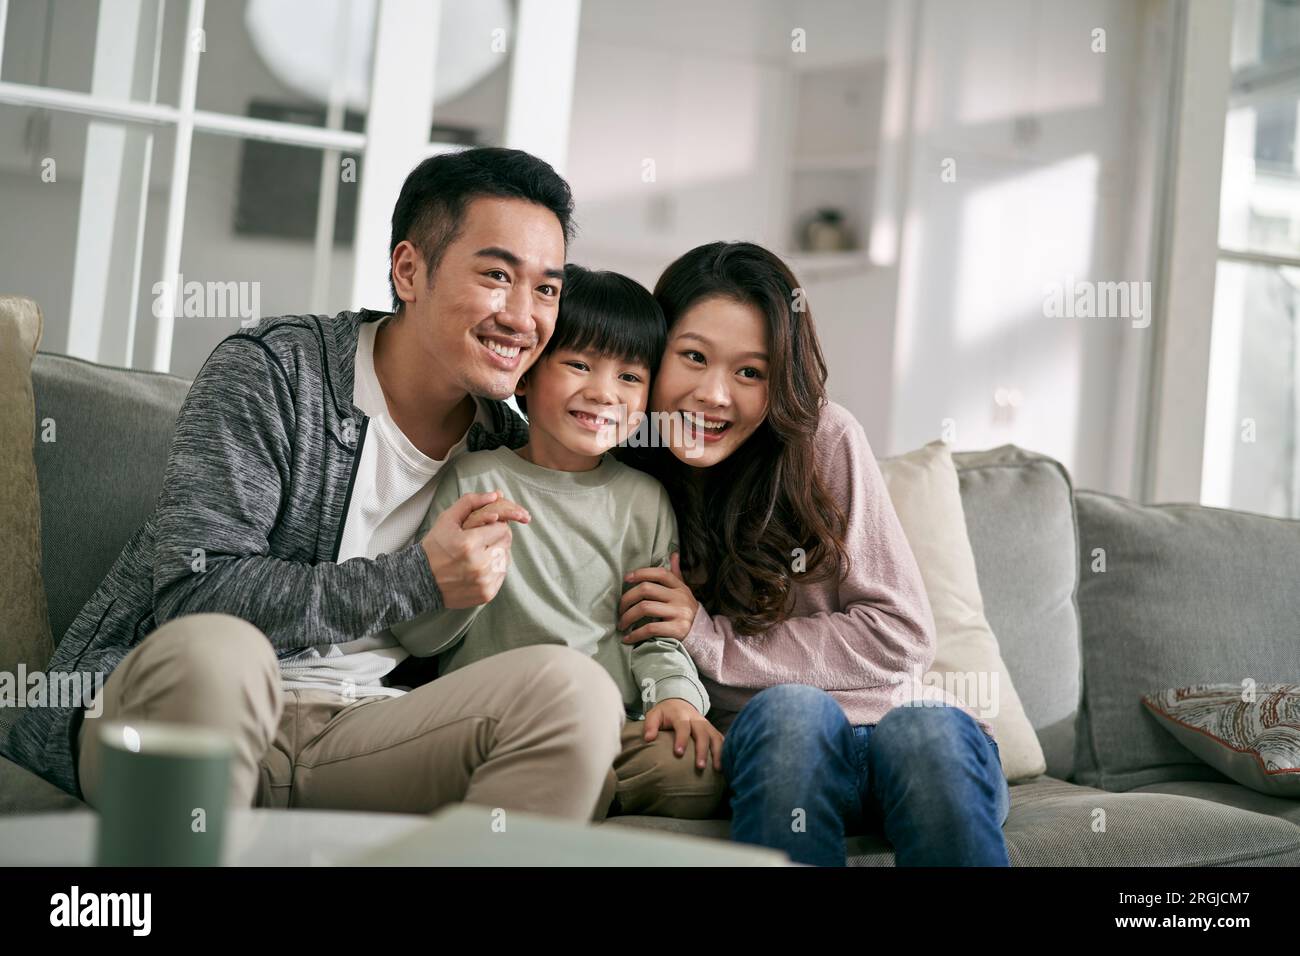 happy young asian family with two children sitting on couch at home enjoying good time together Stock Photo